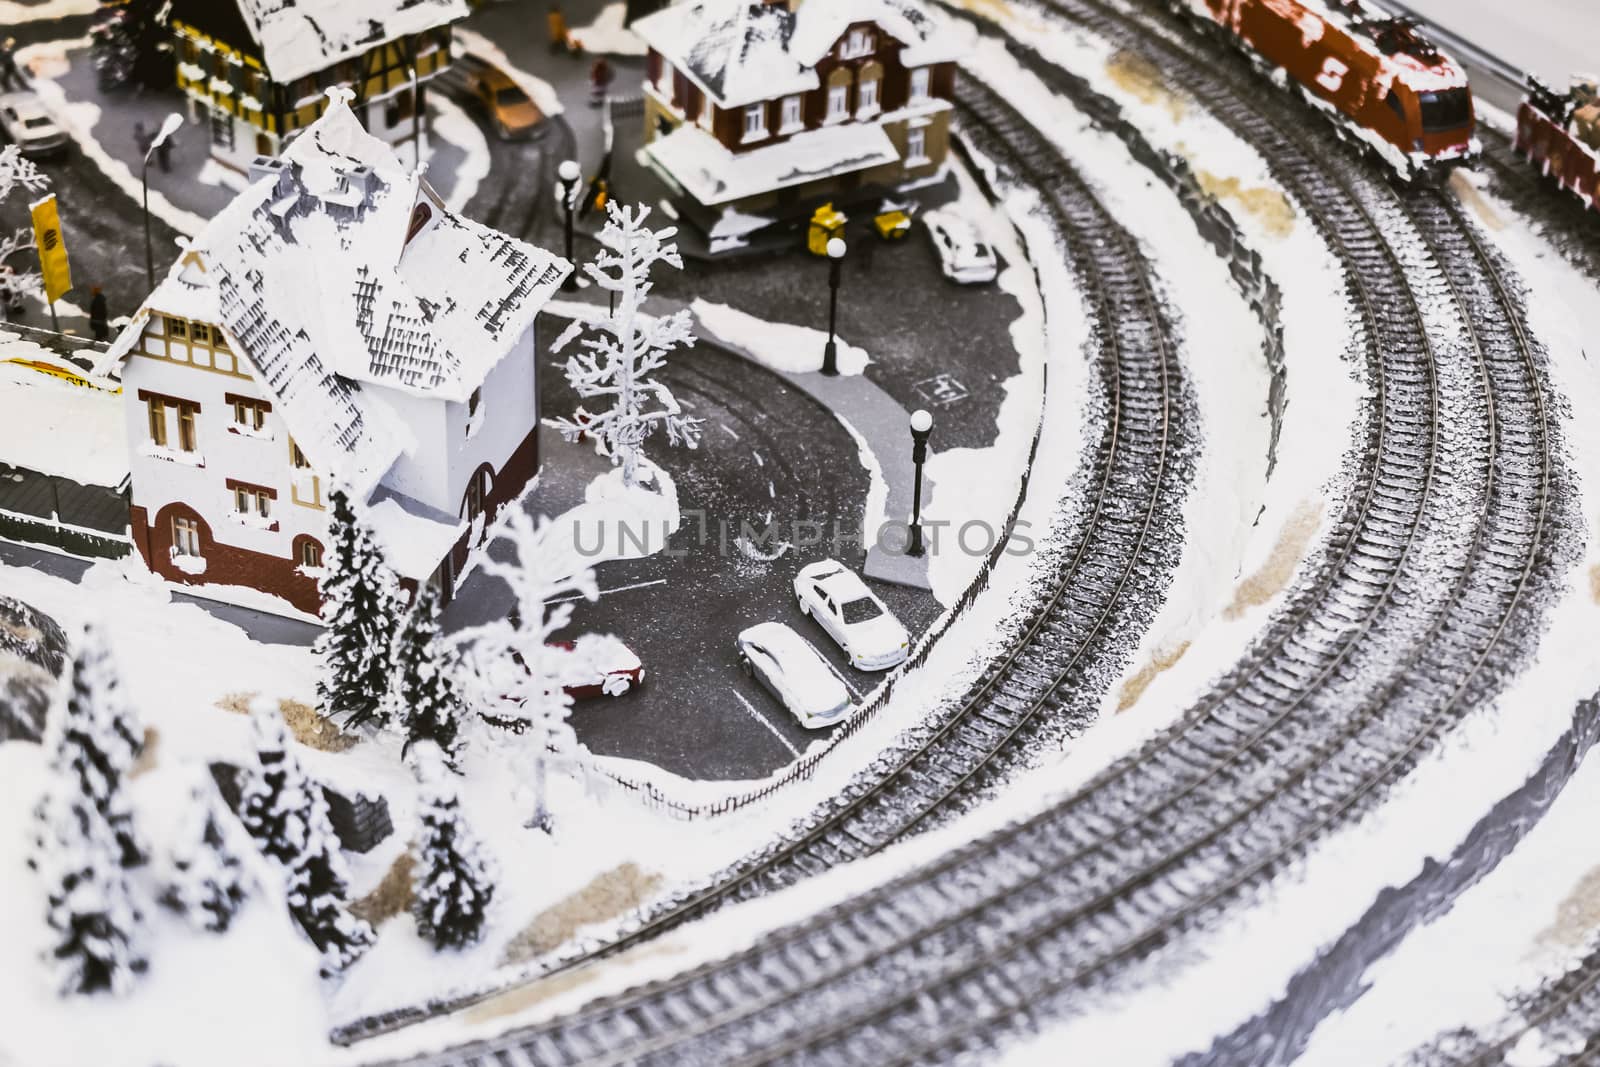 miniature city in winter - with houses, roads, cars, railway